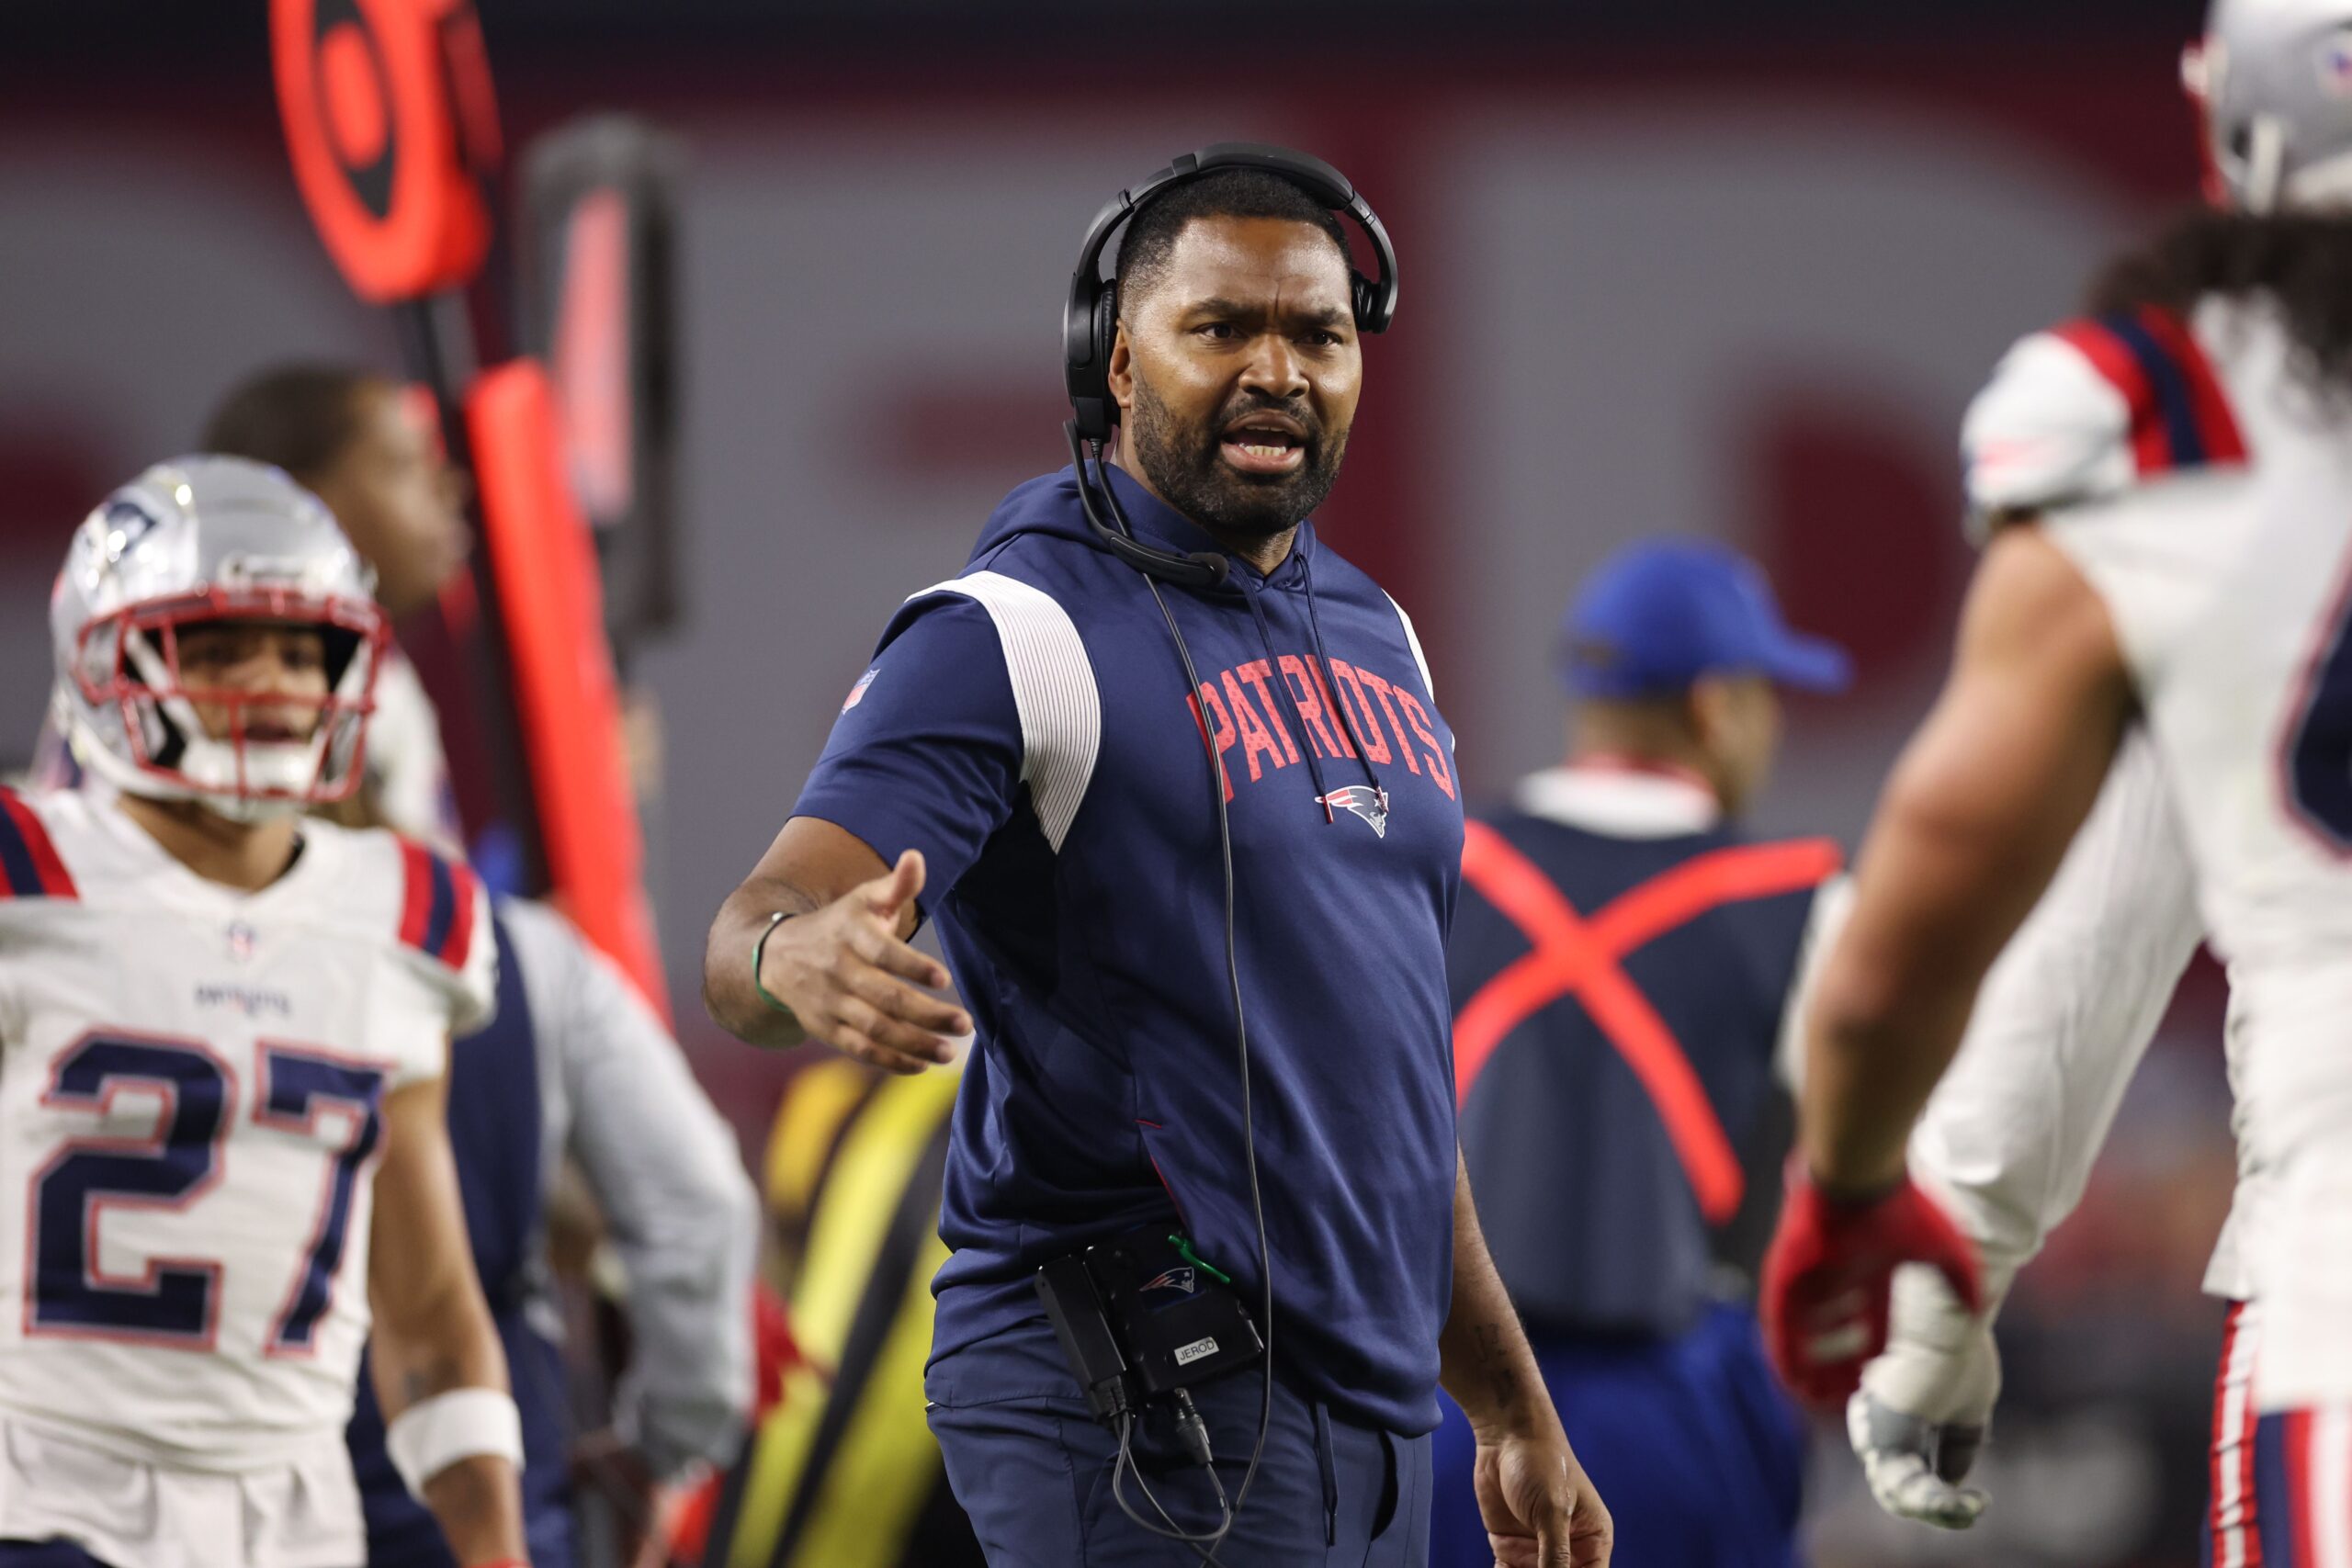 Coach Jerod Mayo of the New England Patriots during the NFL game at State Farm Stadium on December 12, 2022 in Glendale, Arizona. The Patriots defeated the Cardinals 27-13.